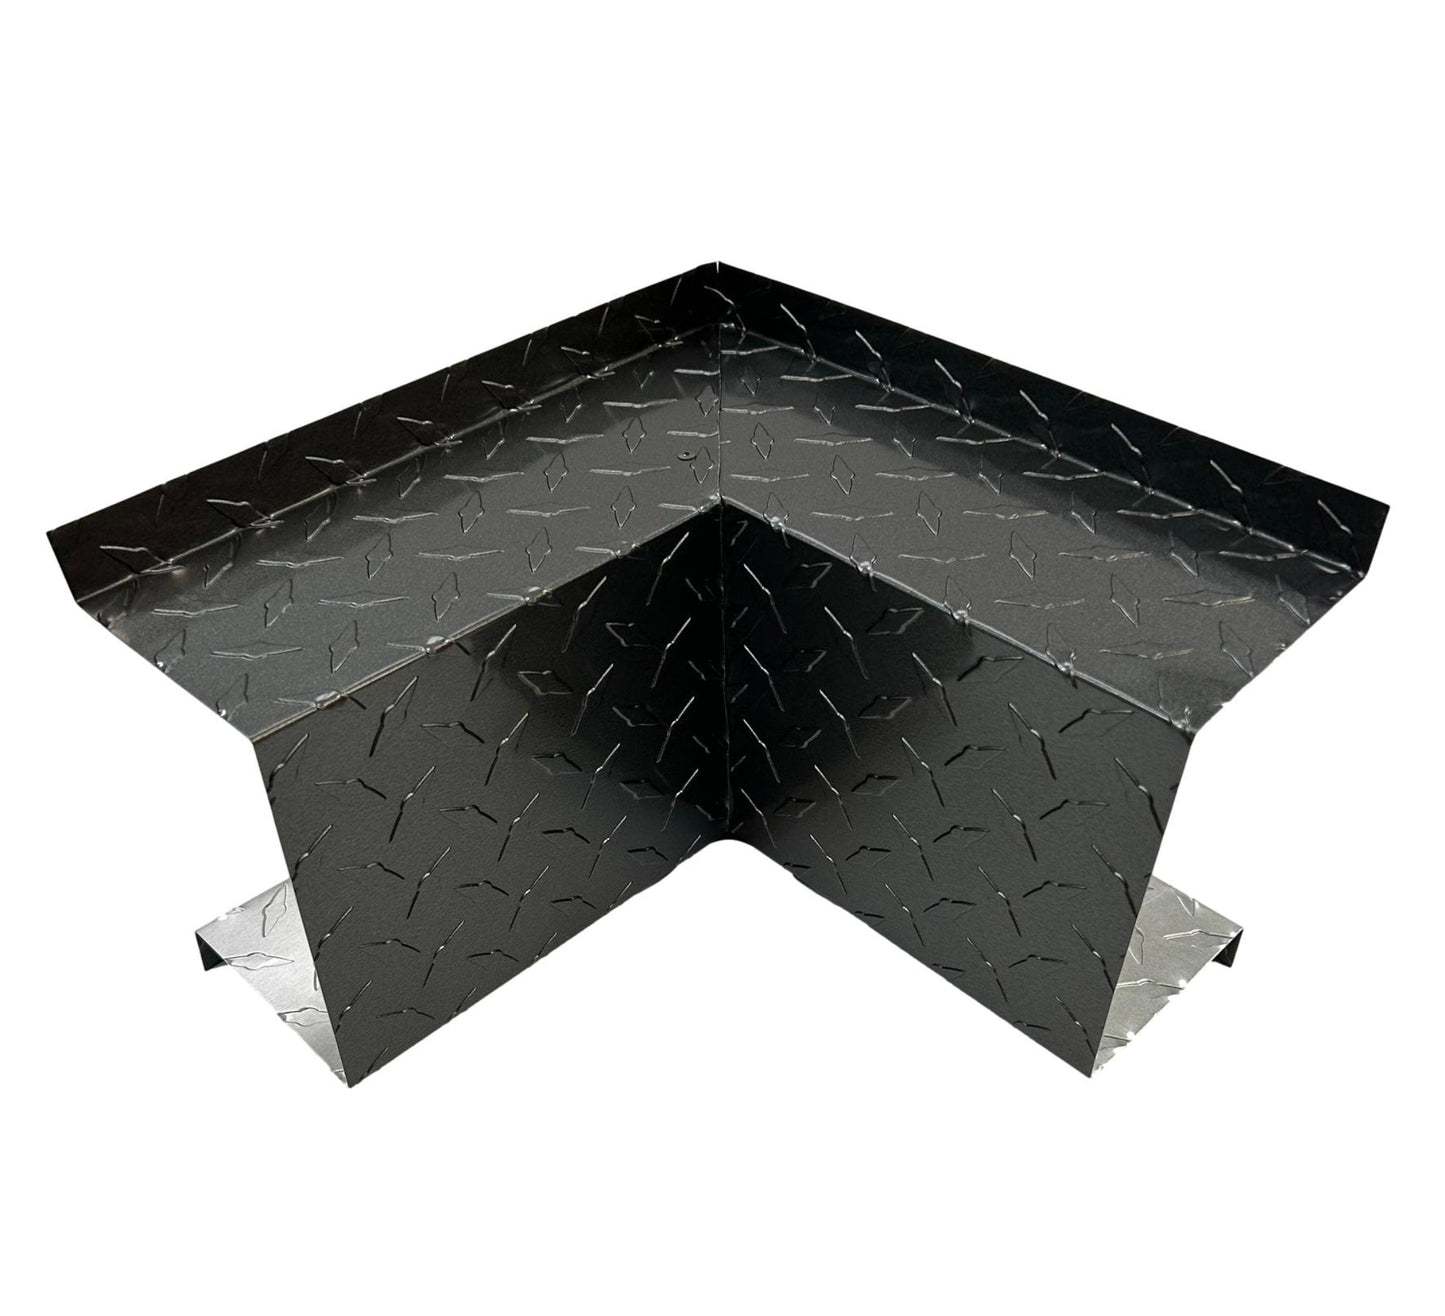 An angular, black metal Residential Series - Line Set Cover Inside Corner Elbows - Premium Quality by Perma Cover with a diamond plate pattern, designed to protect wall corners during HVAC installations. The guard is shown standing upright, highlighting its folded shape and textured surface.